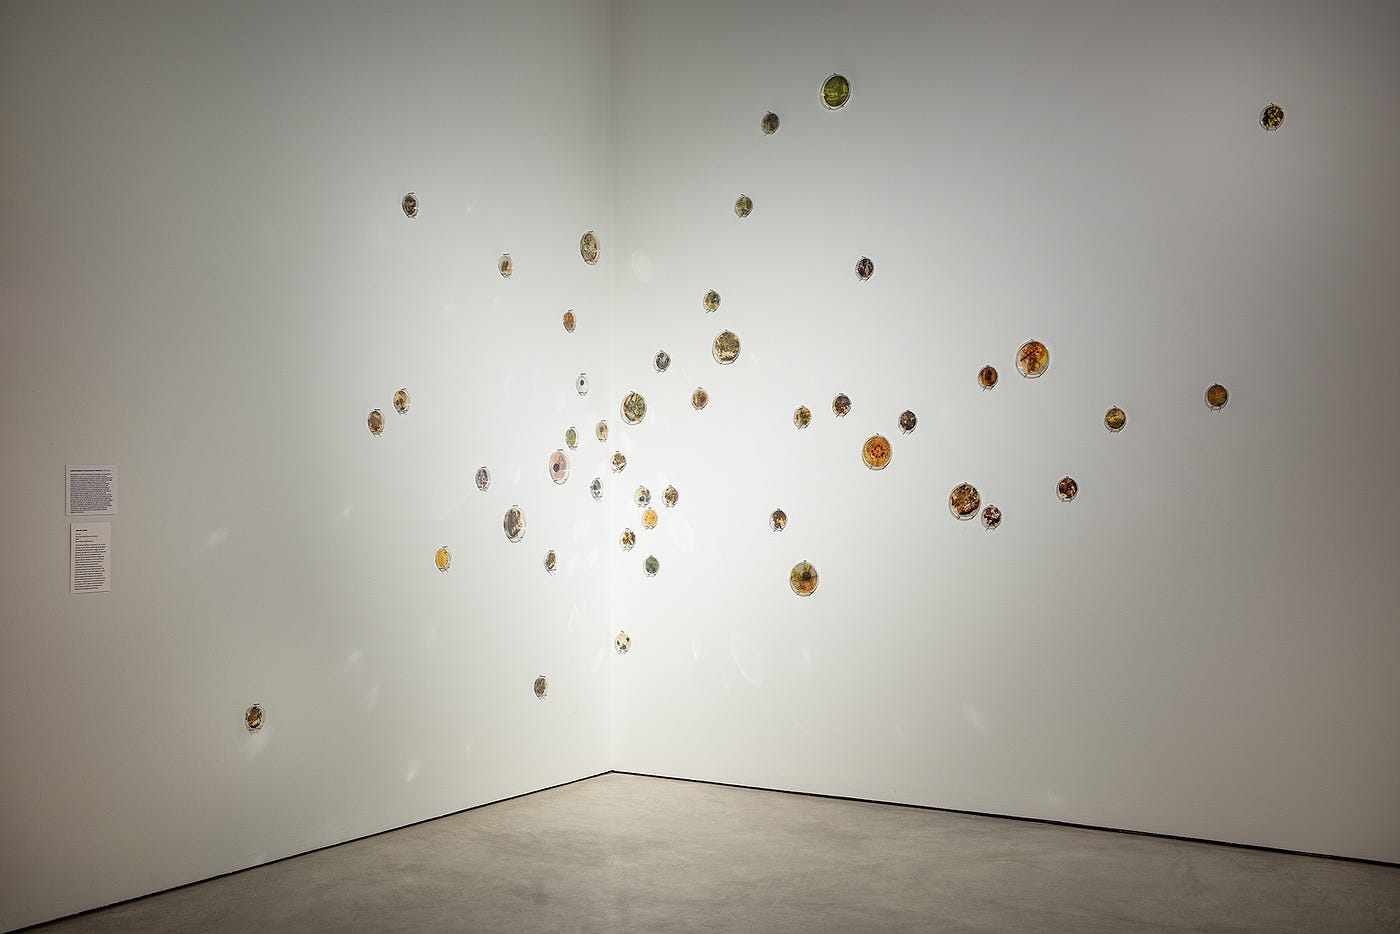 A cluster of green, yellow, and brown petri dishes features family album photographs, layered with images of food, flowers, and plants from South West Asia and North Africa. The petri dishes are installed across the gallery wall and are supported by three small nails each.